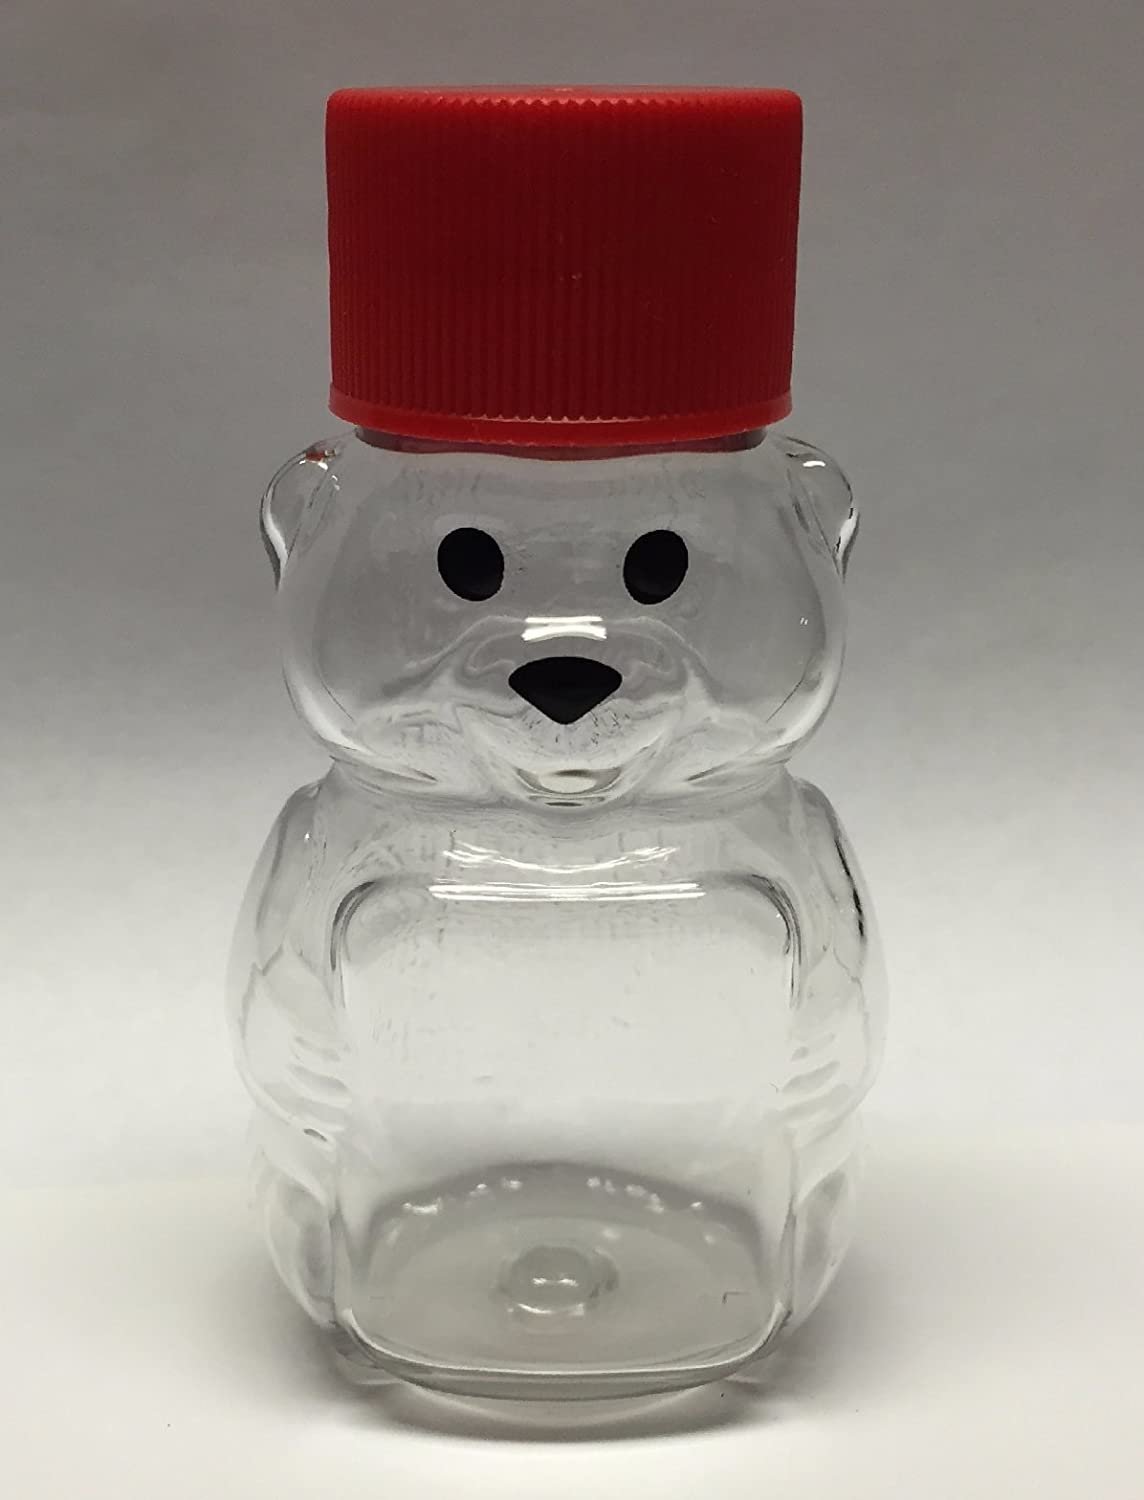 Clearview Container 24 Pack Honey bear with Screw cap Lid Plastic Squeeze Bear 2 oz with Cap (red)